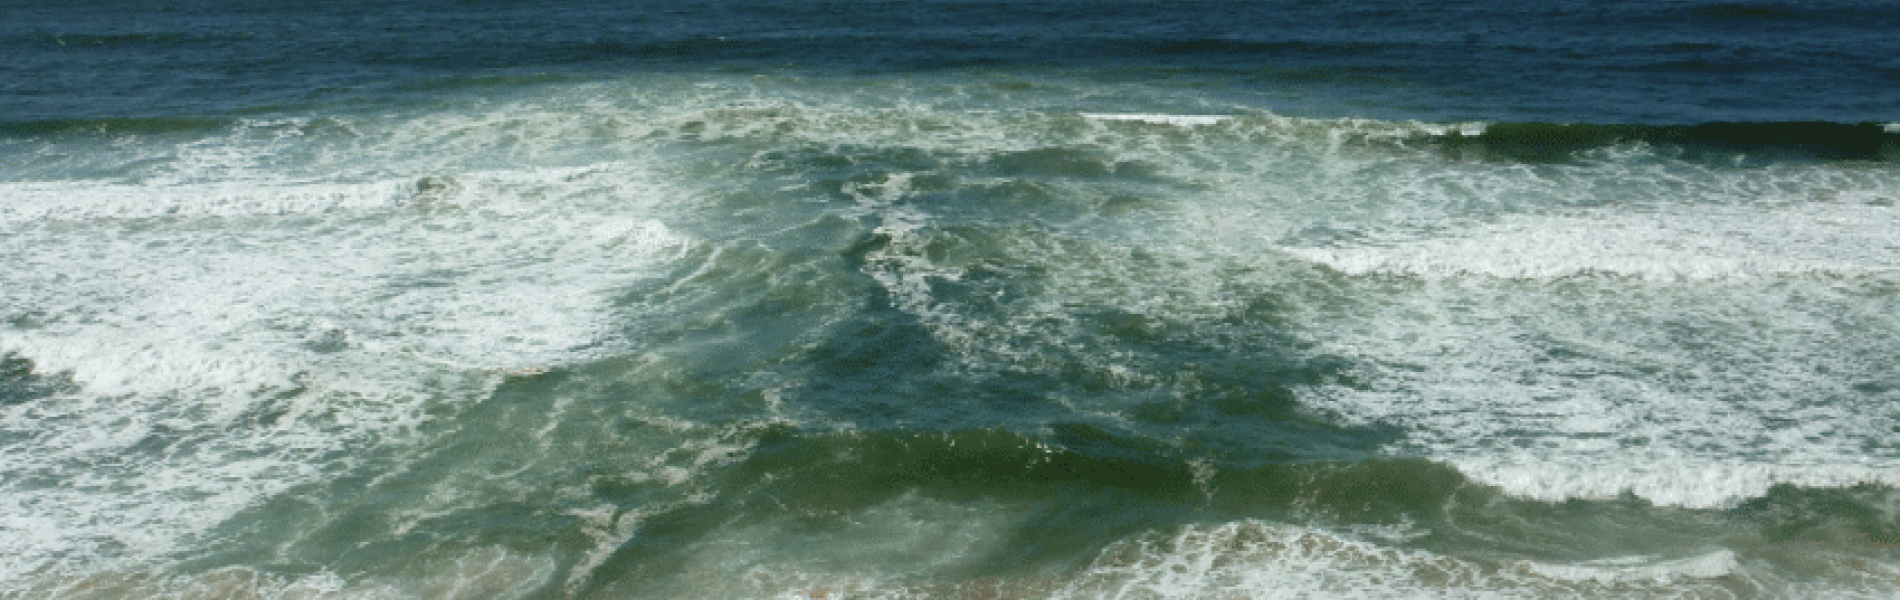 Picture of a rip current